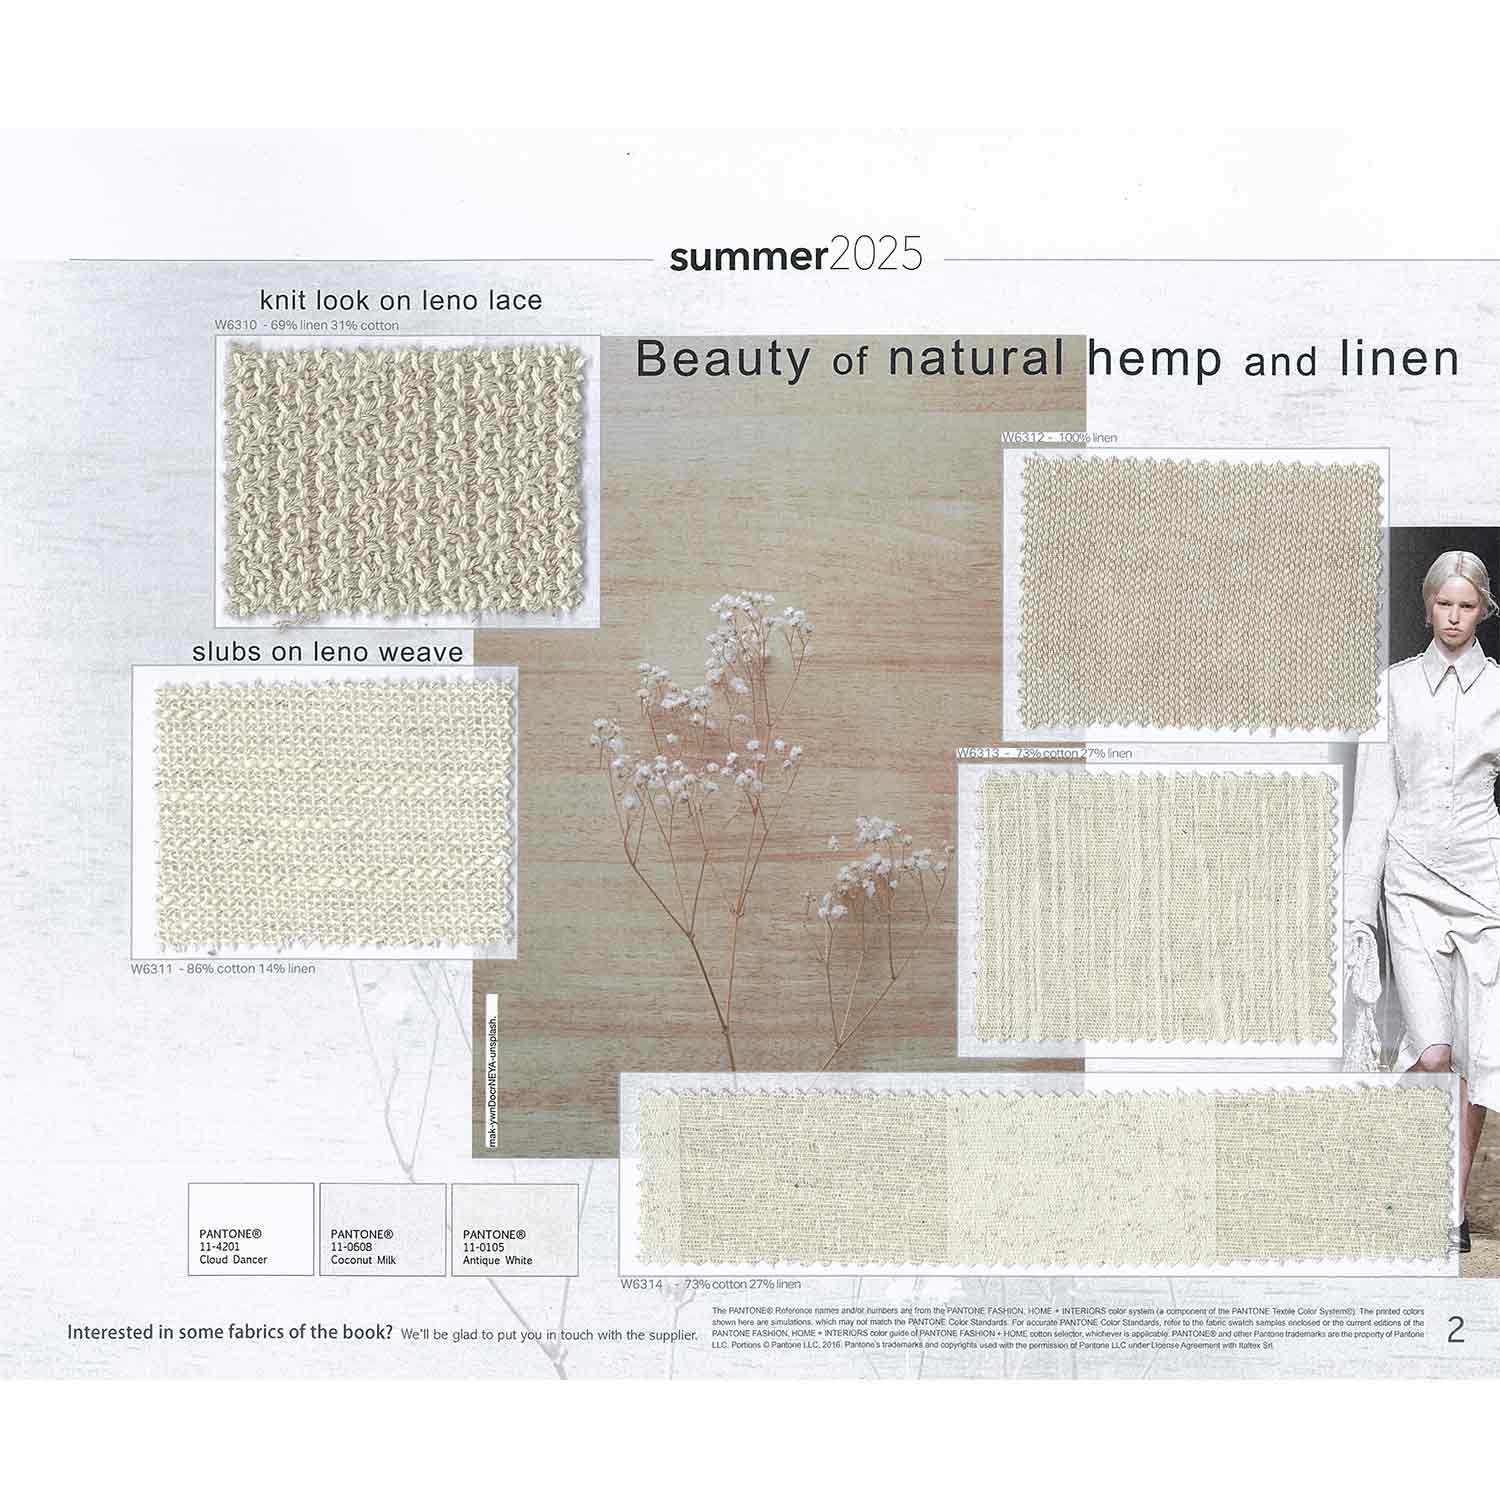 Five fabrics for women's wea summer 2025 in the natural shades of linen and organic cotton. One knit look leno lace. One horizontal construction with linen slubs on leno lace. One fake plain linen. One bark effect cotton linen.  One large repeat subdued stripe for different uses including dresses, blouses and skirts